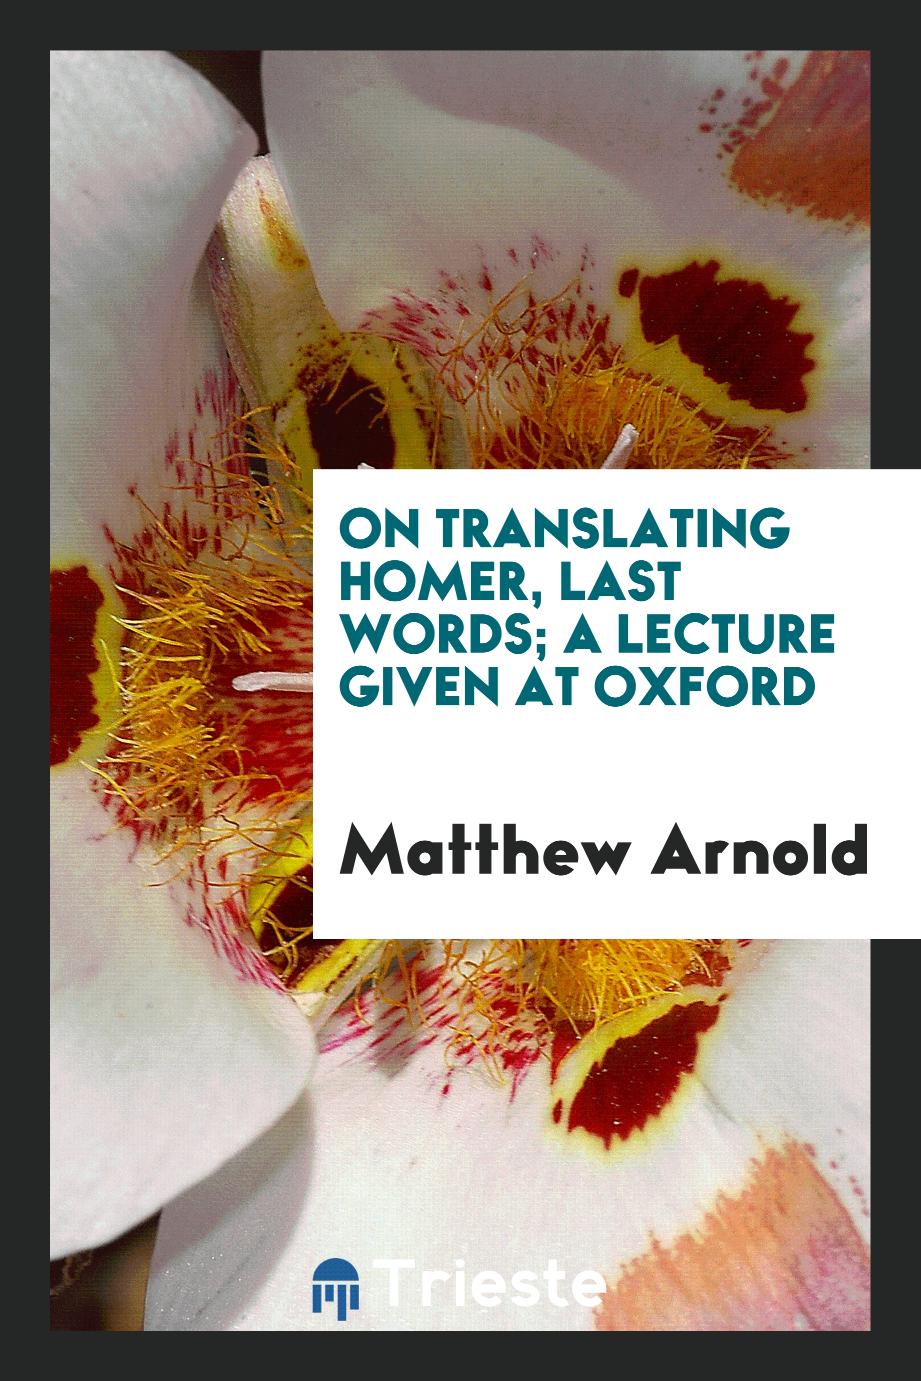 On translating Homer, last words; a lecture given at oxford